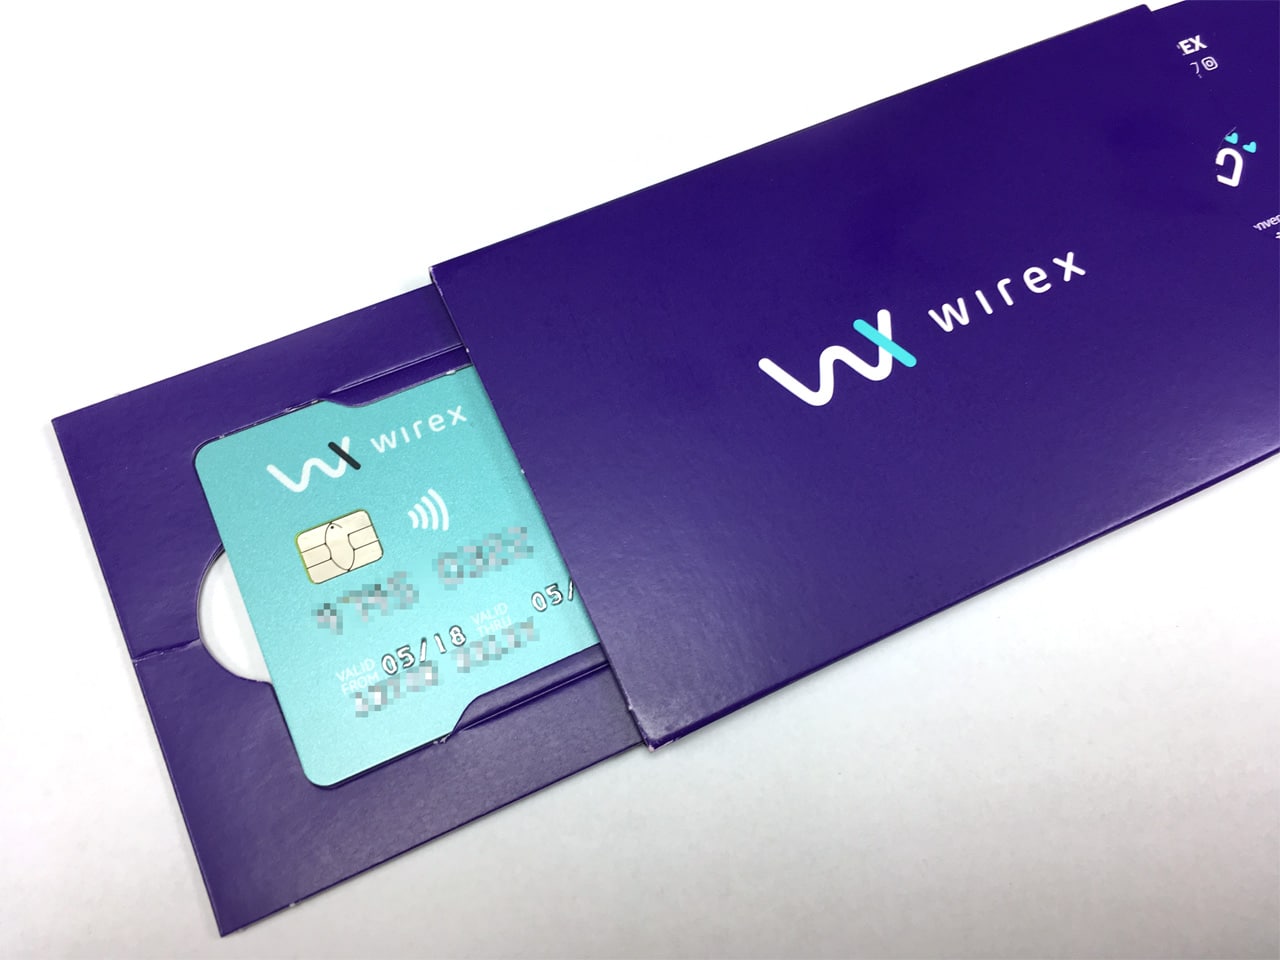 Wirex Visa Debot Card via The Coinage Times